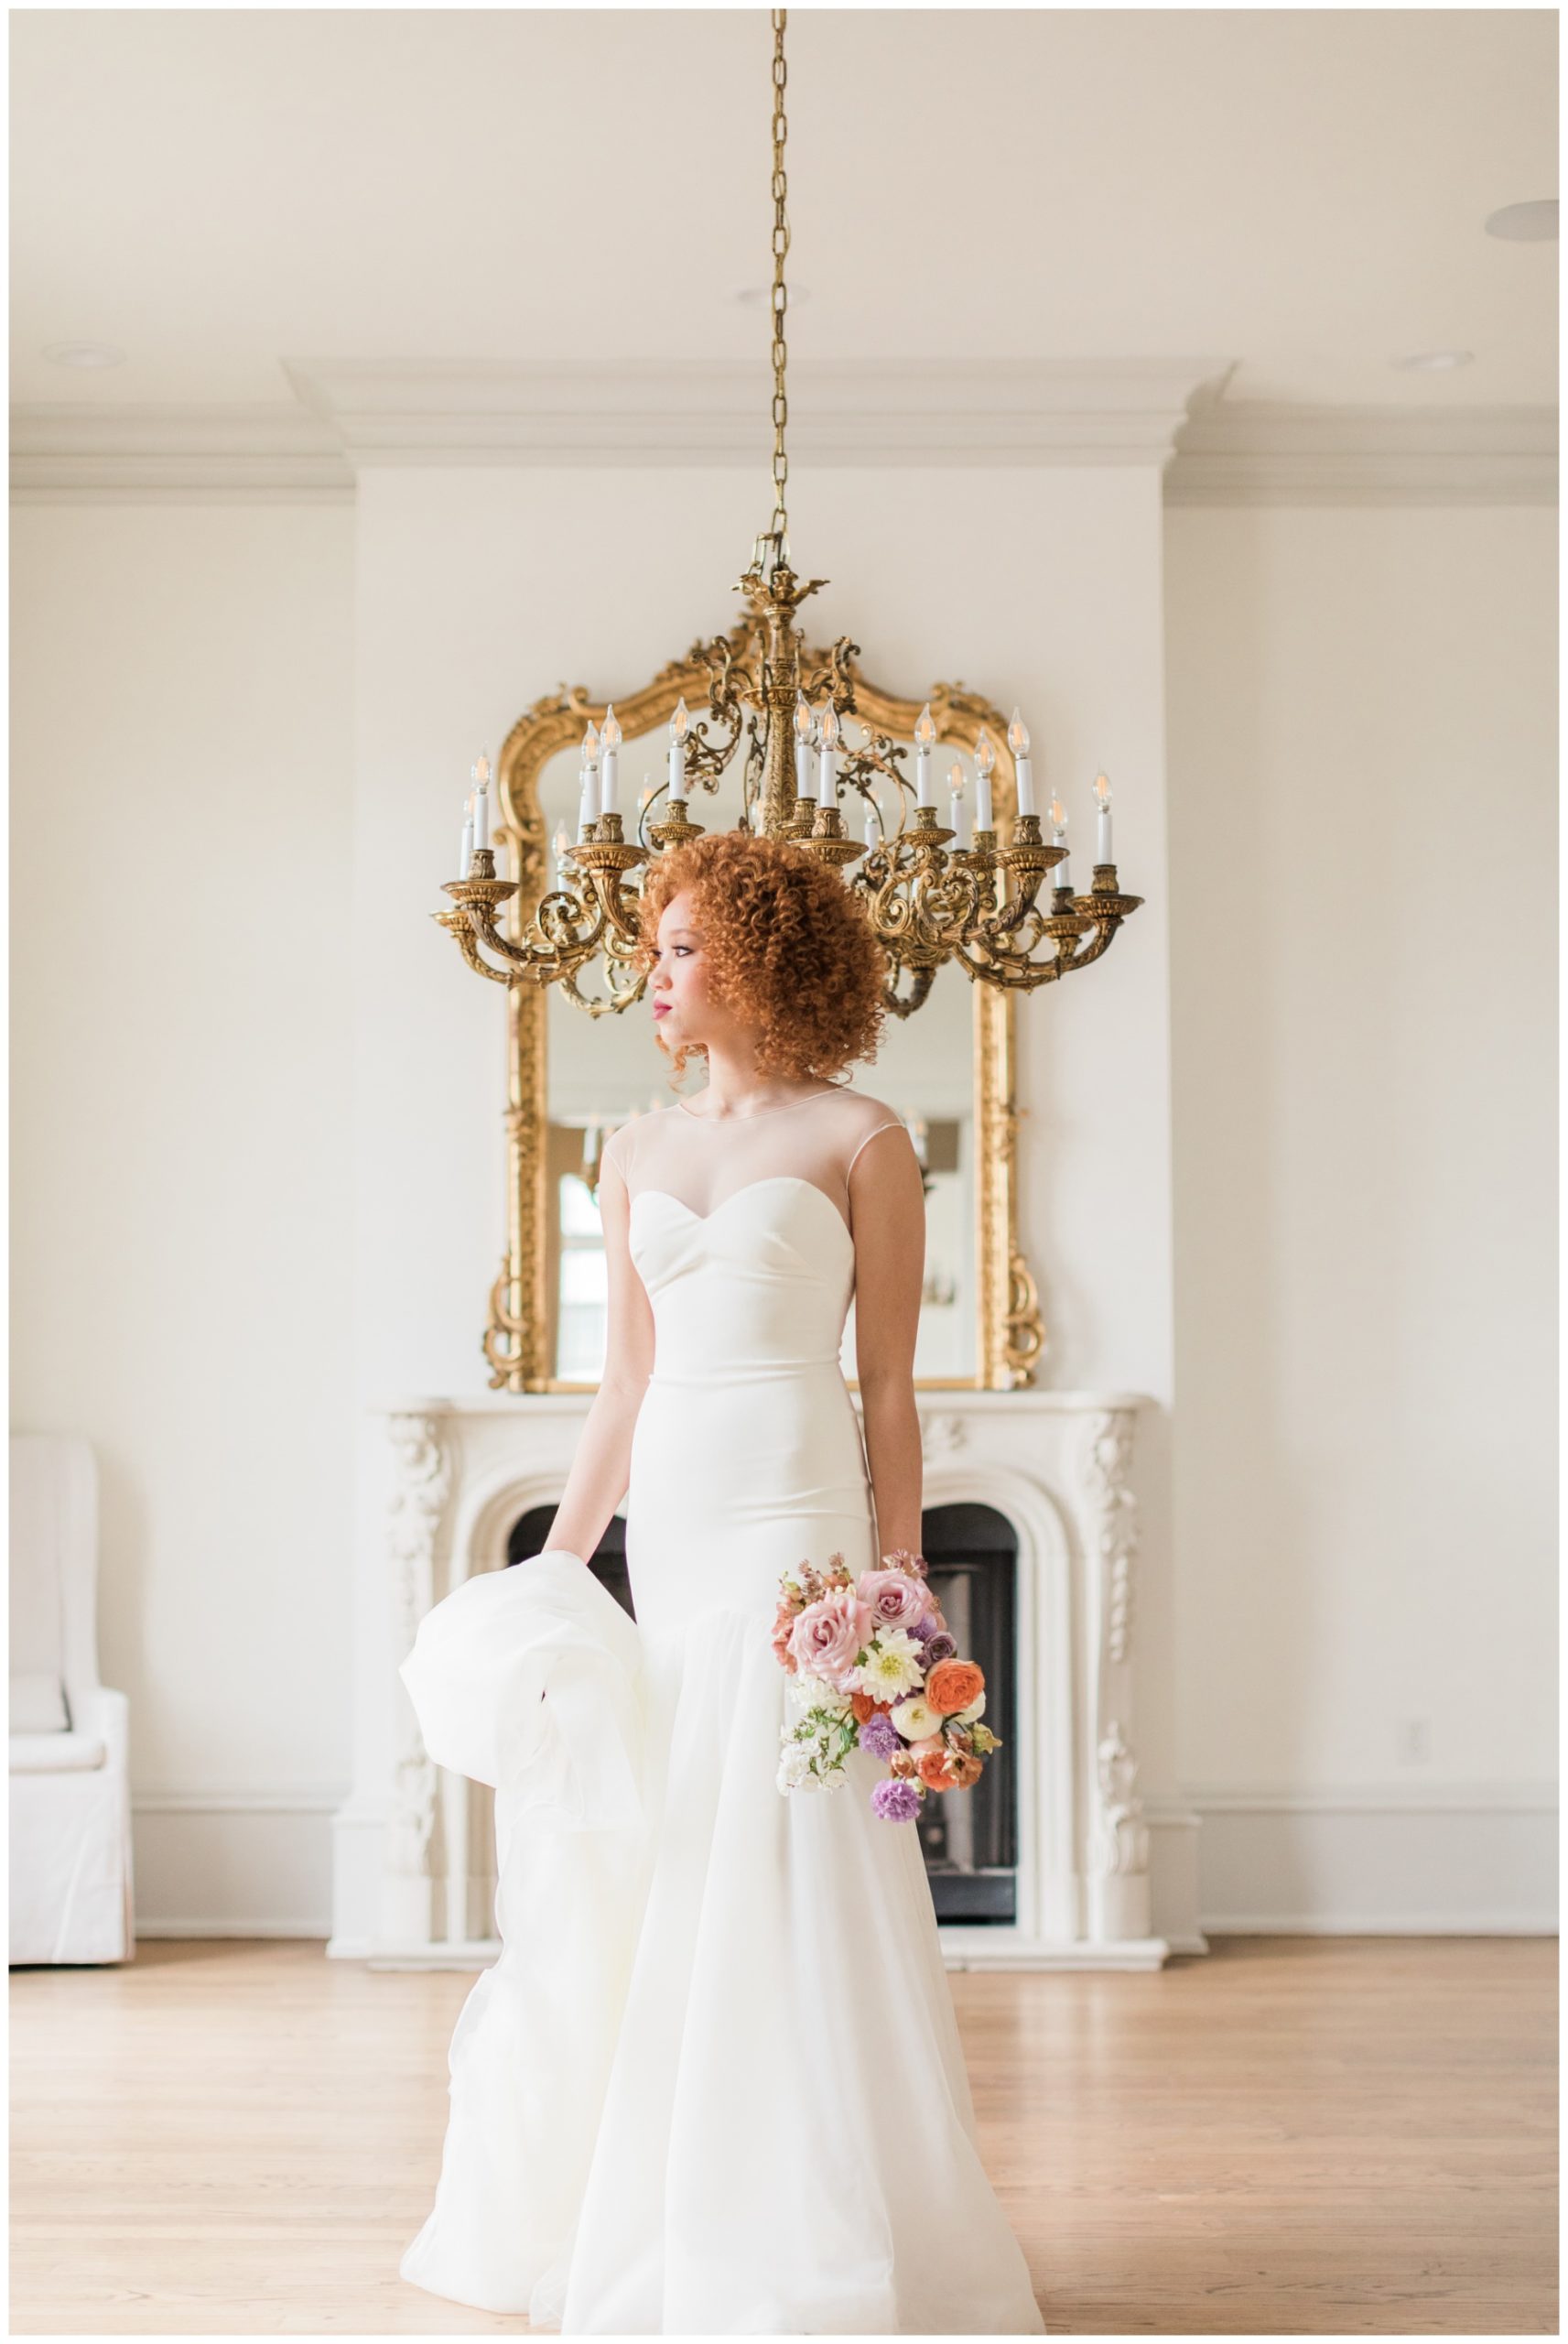 Bride in Holmes by Theia from BHLDN